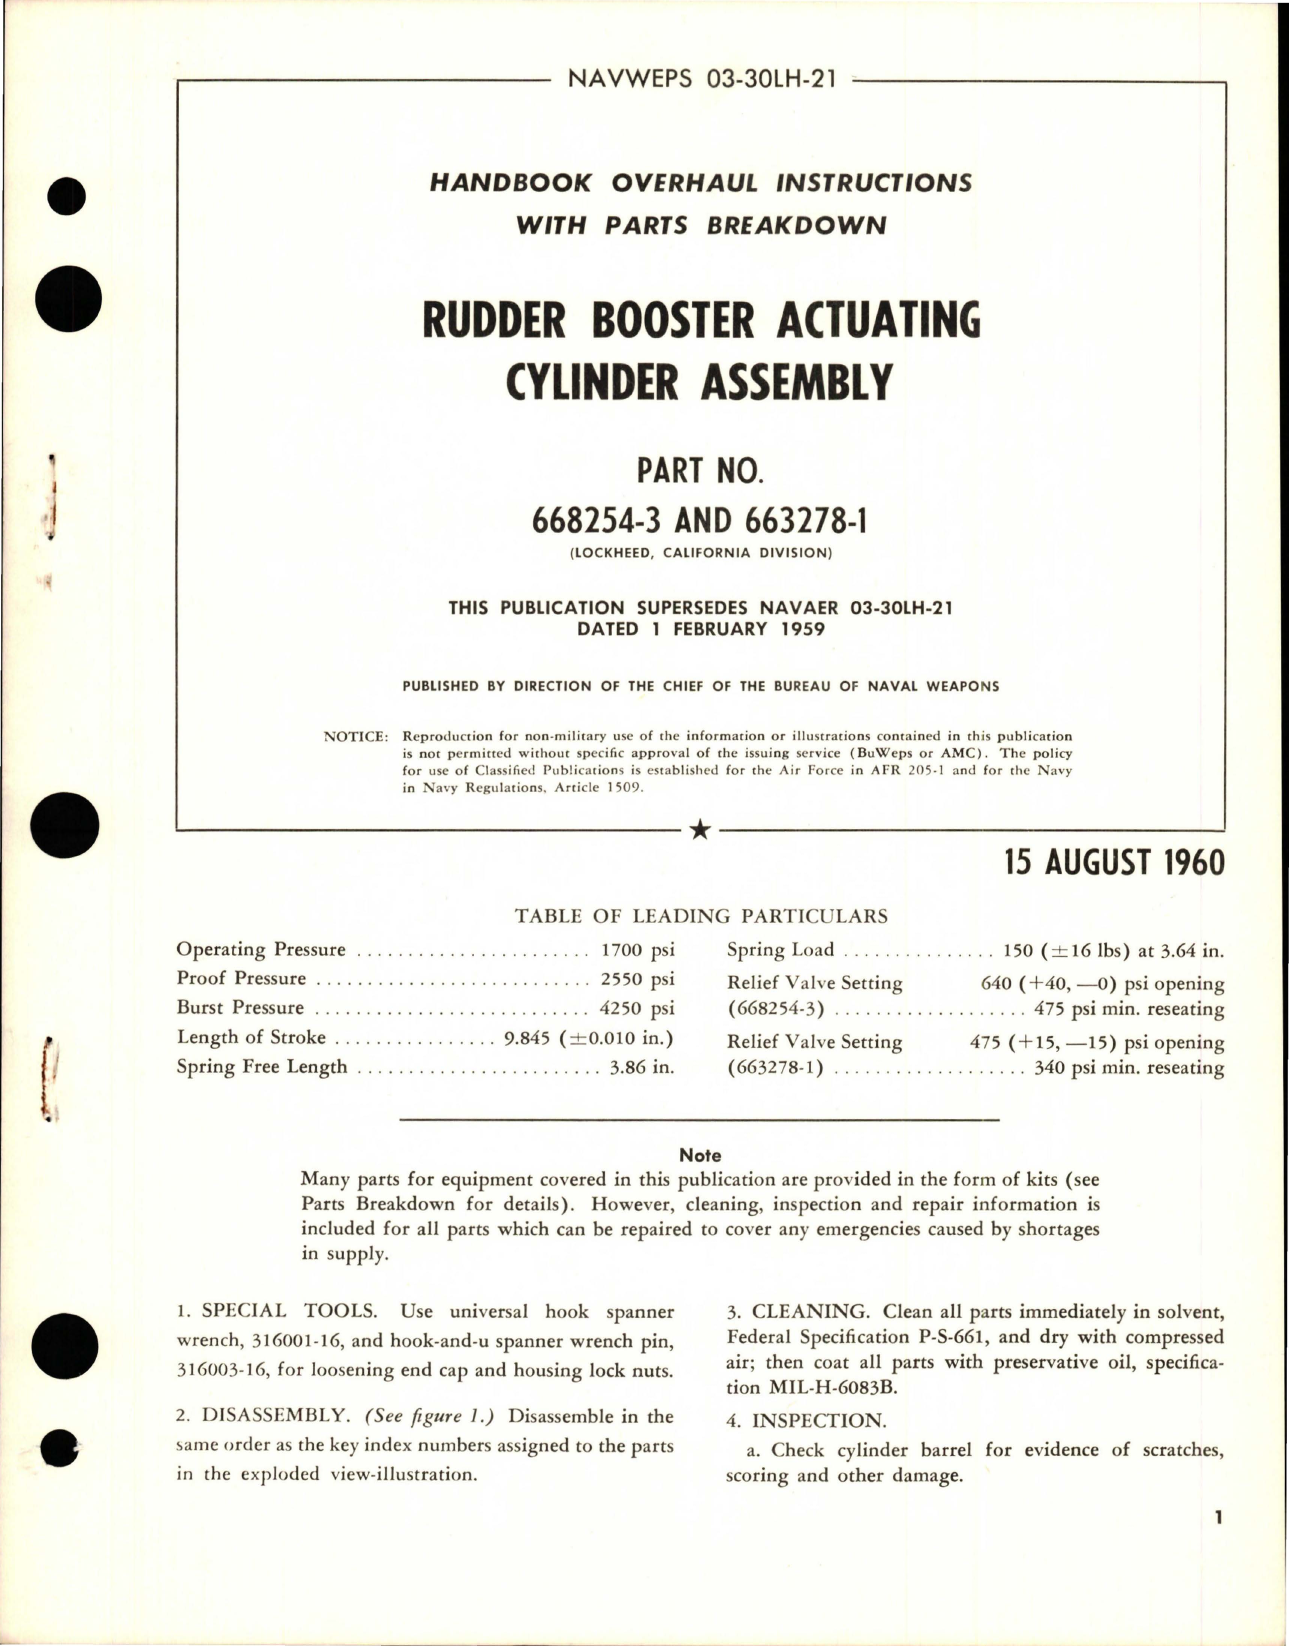 Sample page 1 from AirCorps Library document: Overhaul Instructions with Parts Breakdown for Rudder Booster Actuating Cylinder Assembly - Parts 668254-3 and 663278-1